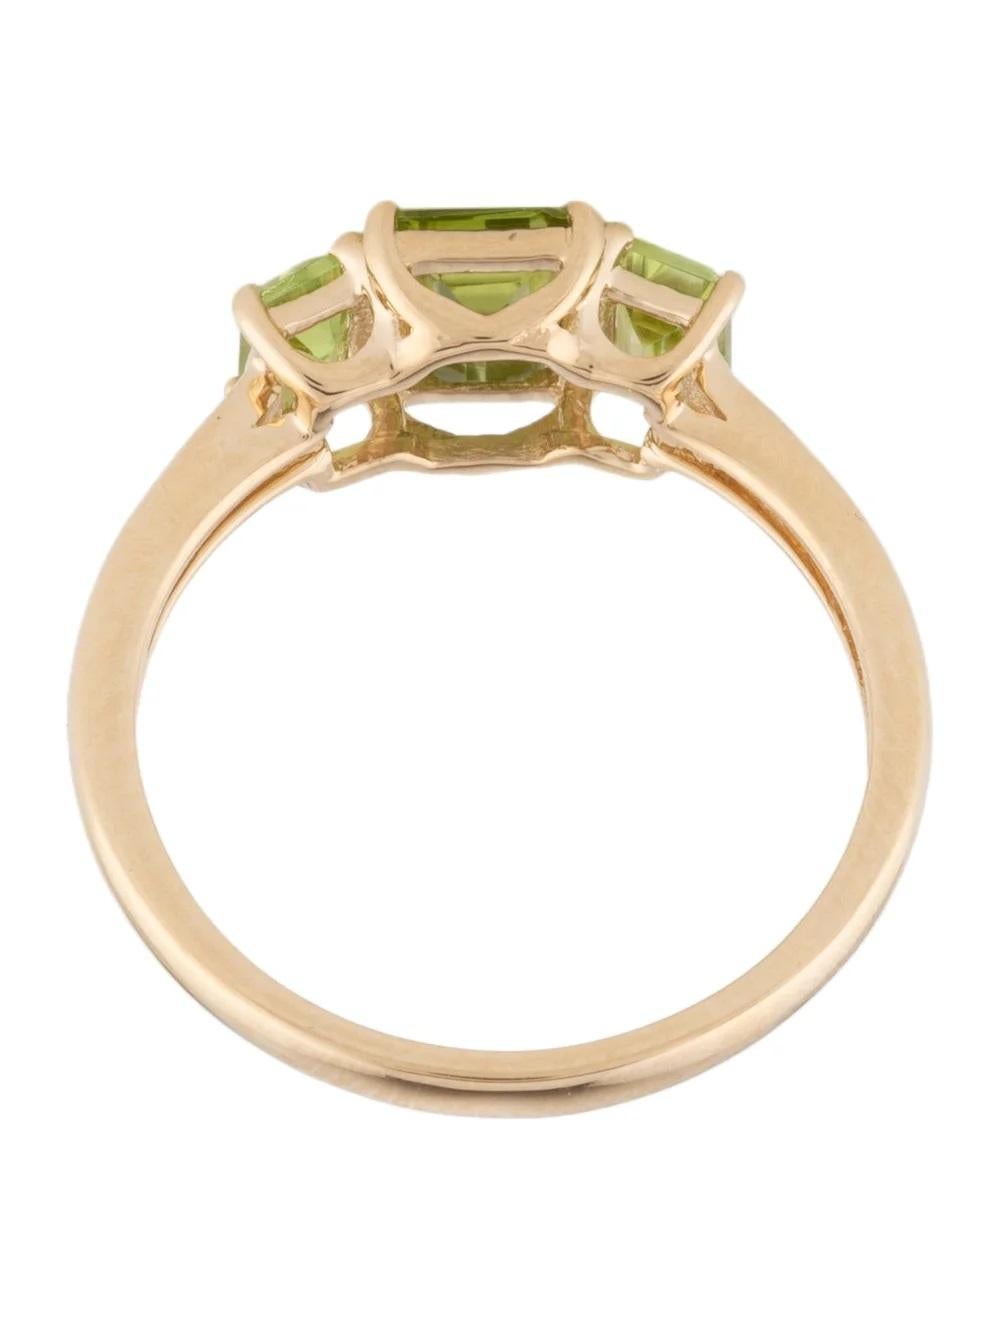 Women's 14K Peridot Cocktail Ring 1.37ctw Green Gemstone Yellow Gold Size 6.75 - Luxury For Sale